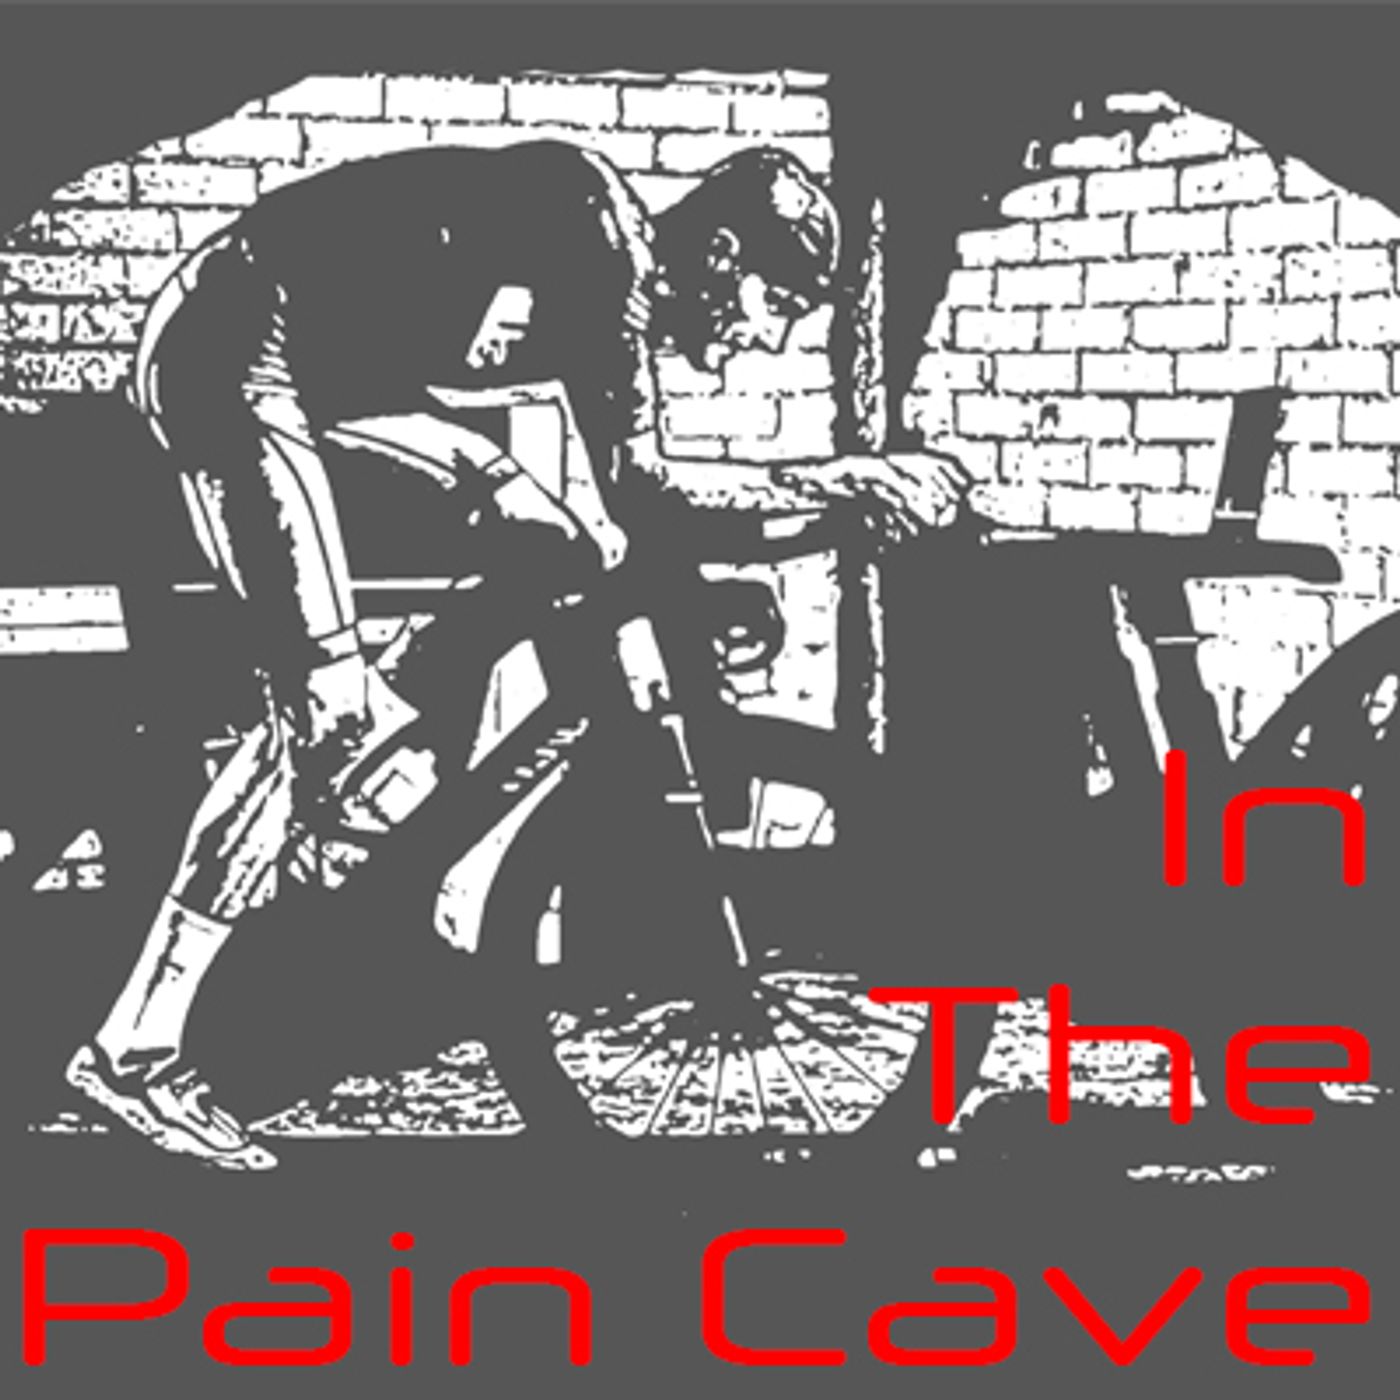 In The Pain Cave EP 2 CHOP CONTROVERSY